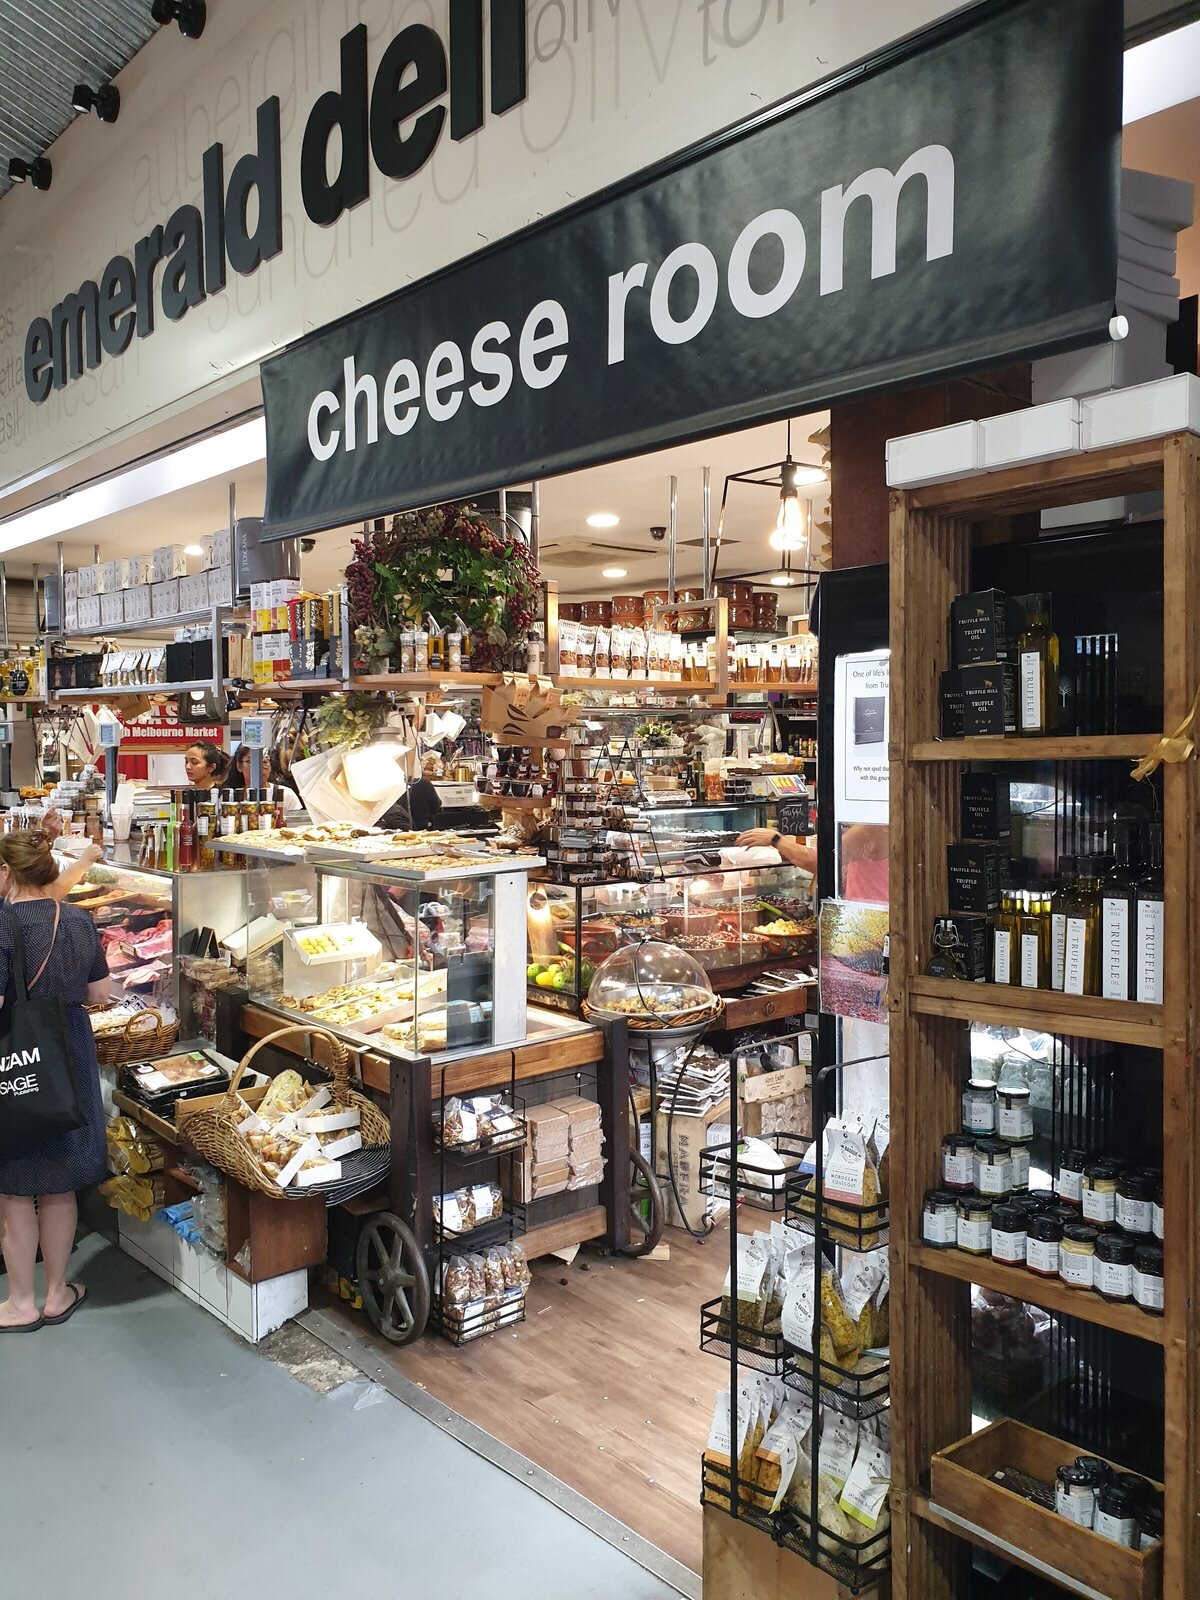 The cheese room at South Melbourne market